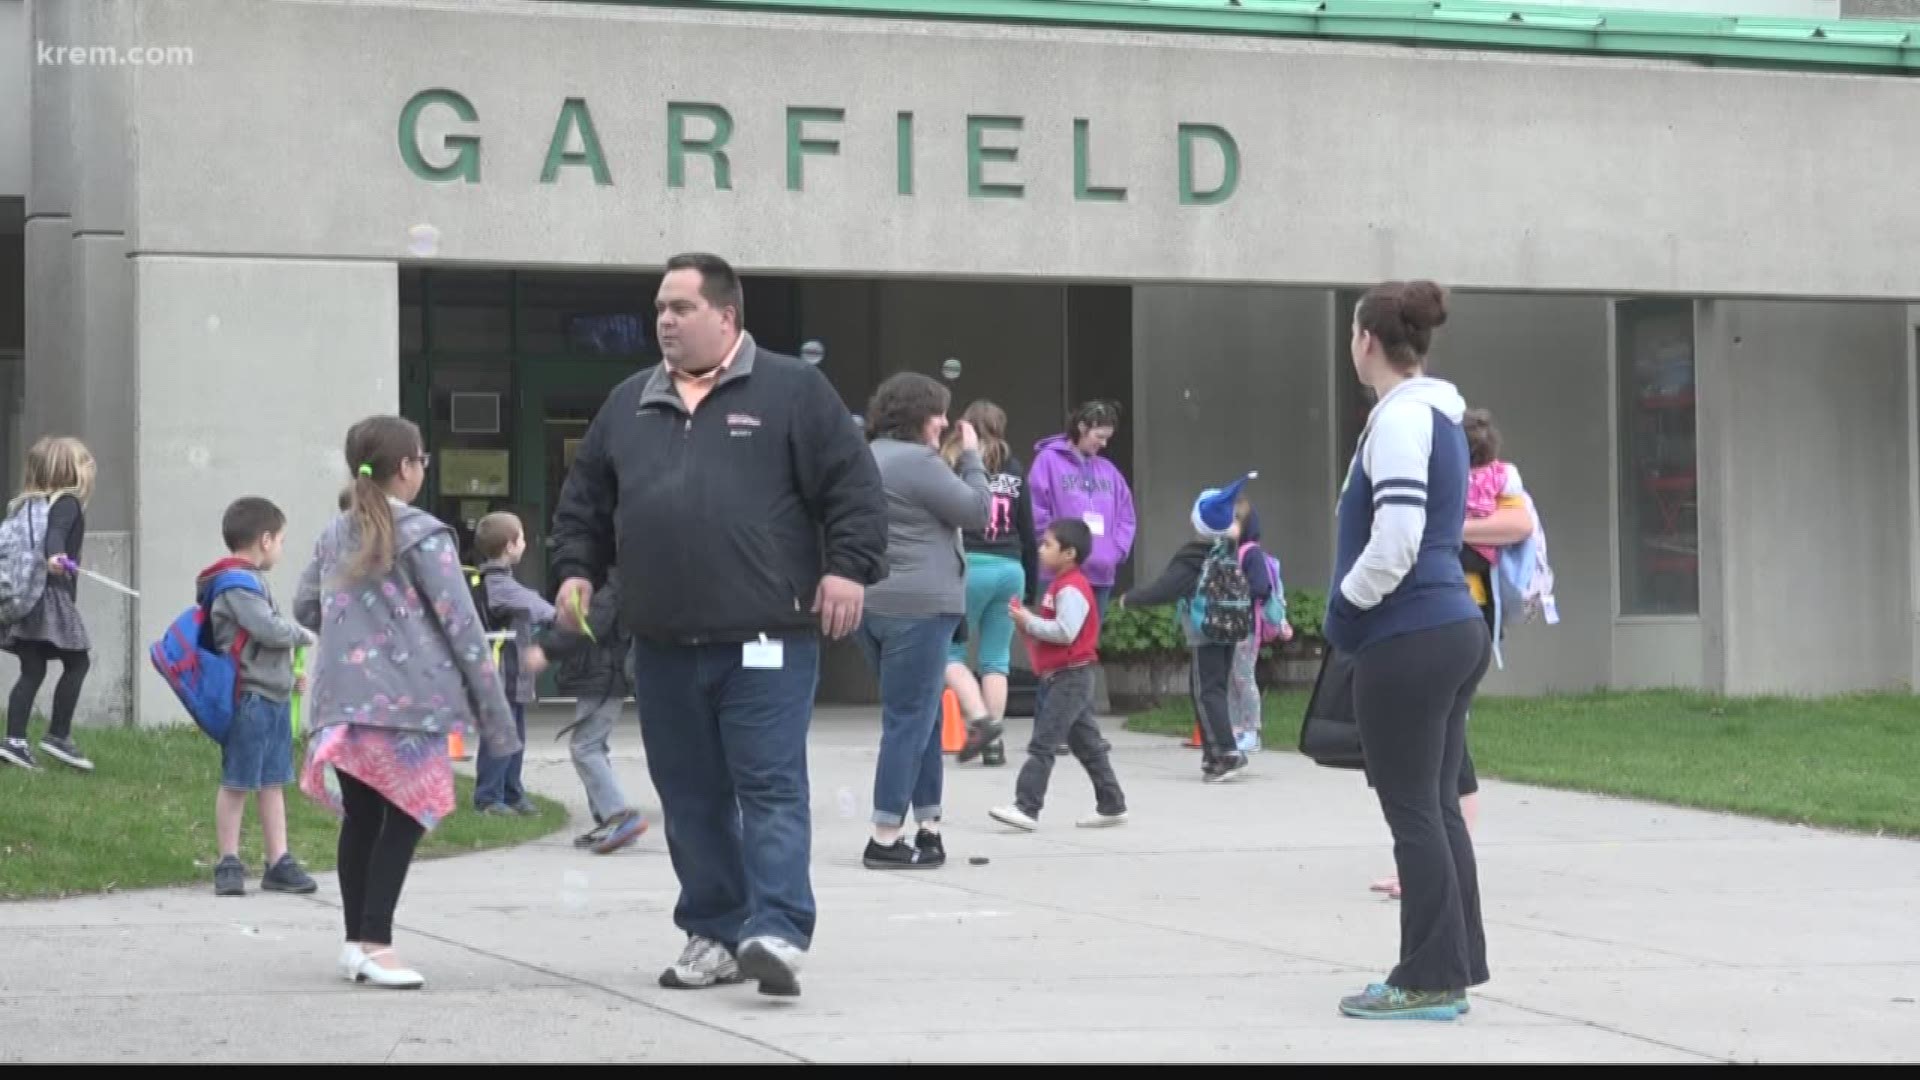 Thanks to a new program, students at Garfield Elementary no longer stand in line for up to 30 minutes because they now have plenty of things to keep them occupied.